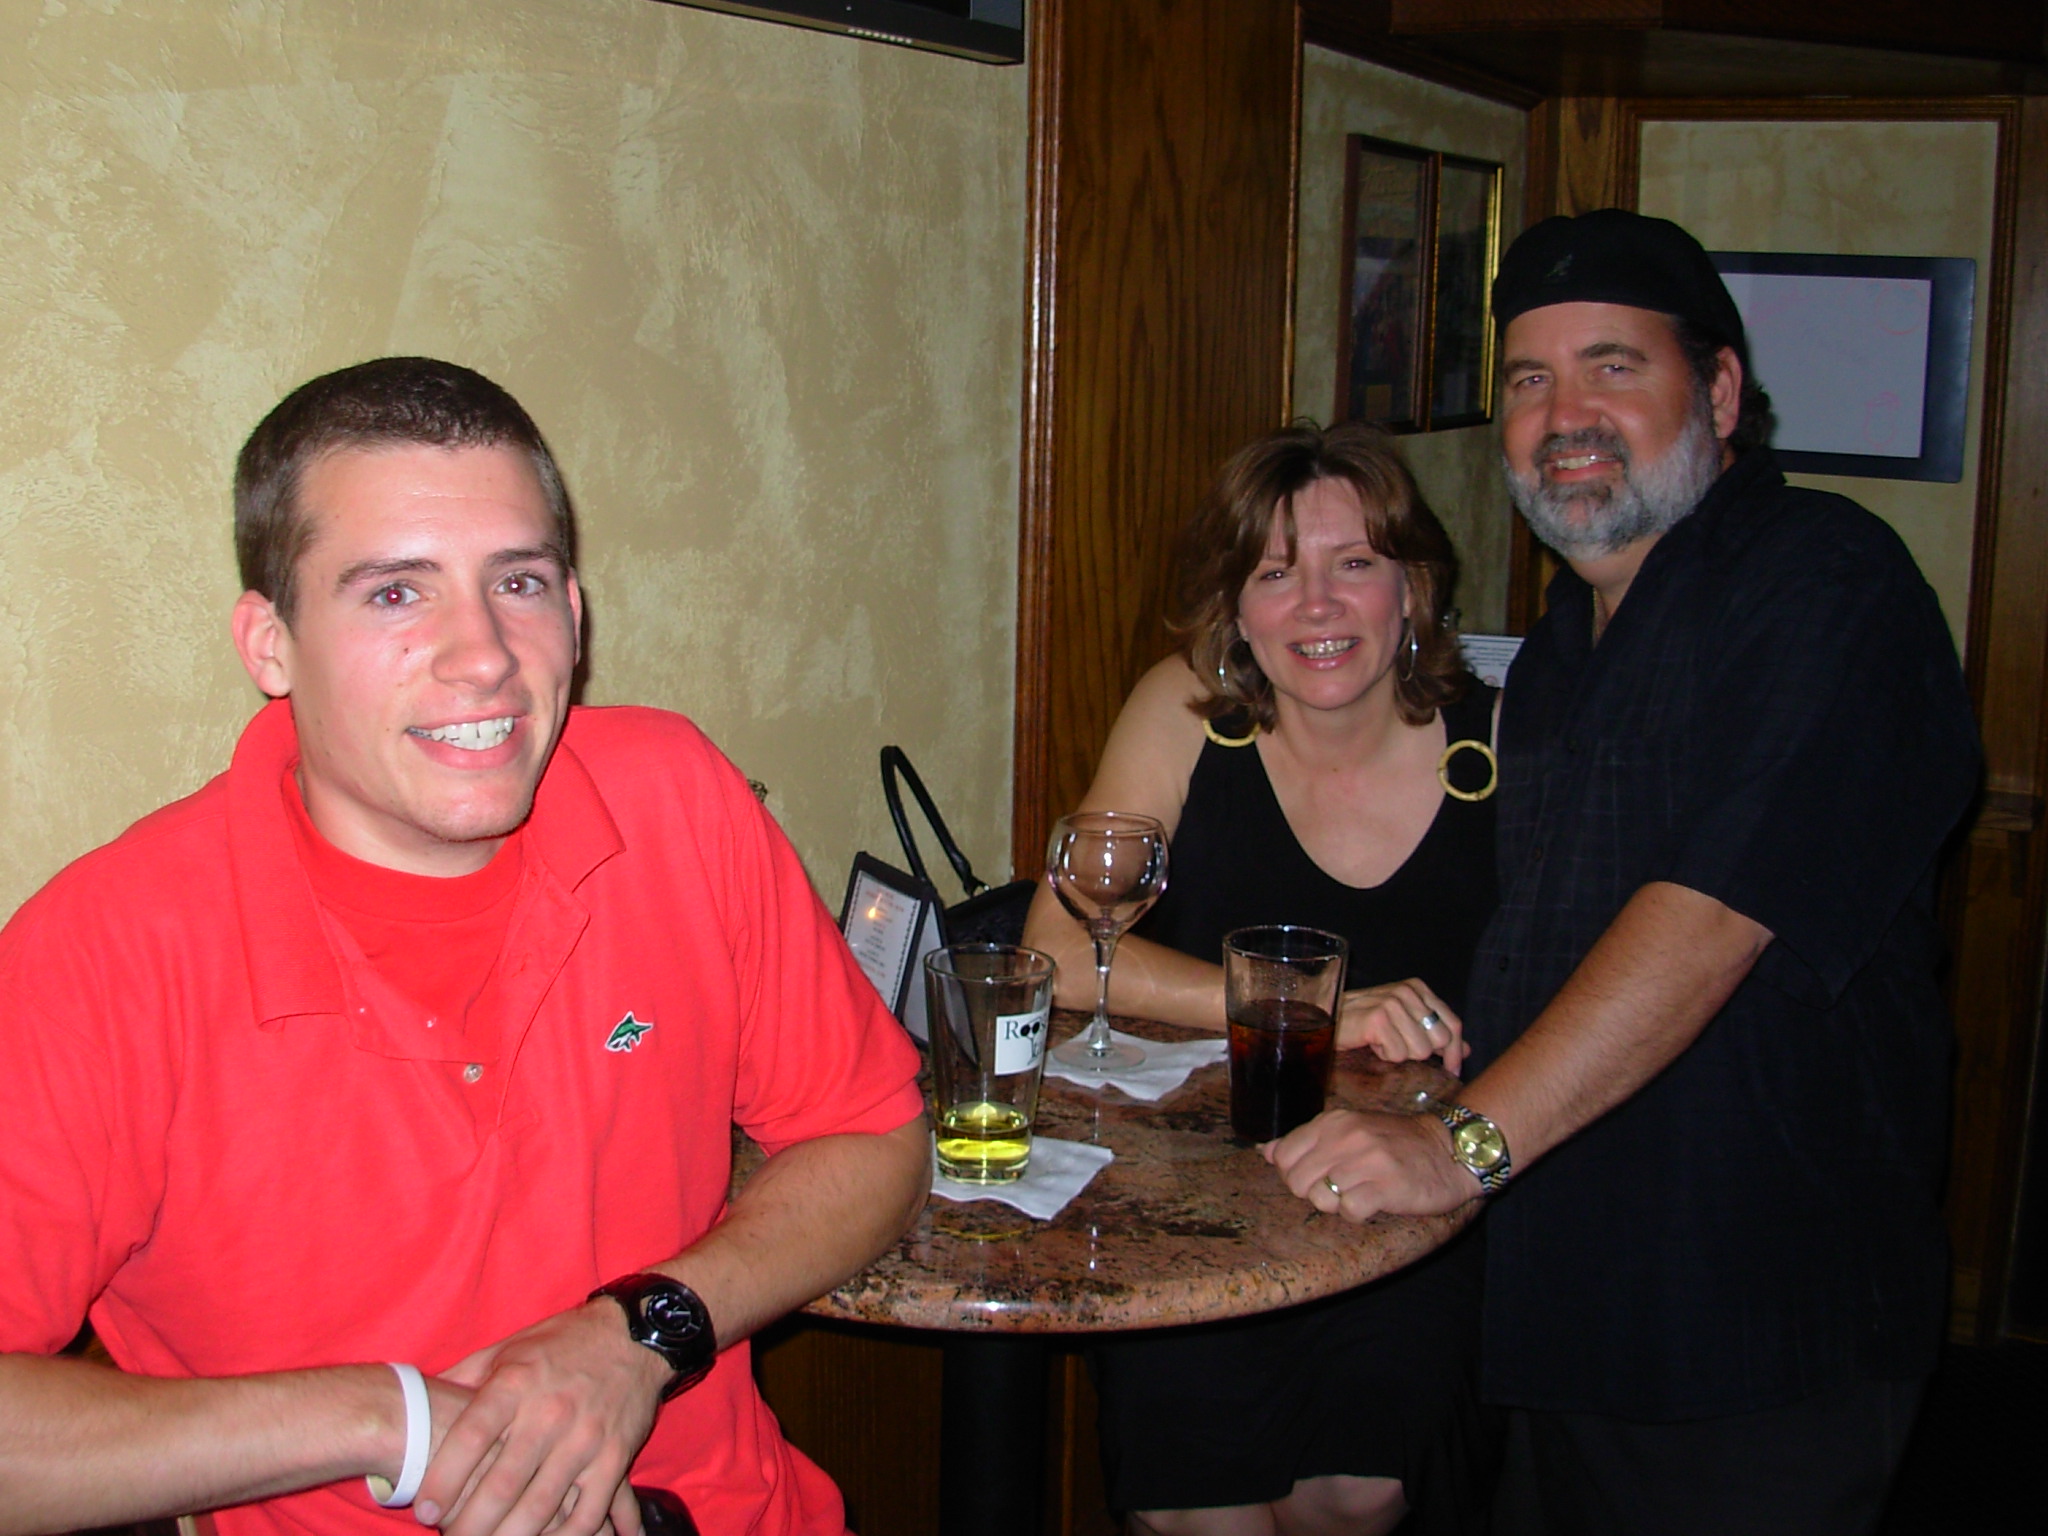 Landon, Pam & Kirk Wise celebrate the Wise Guy's birthday at the Roosevelt
